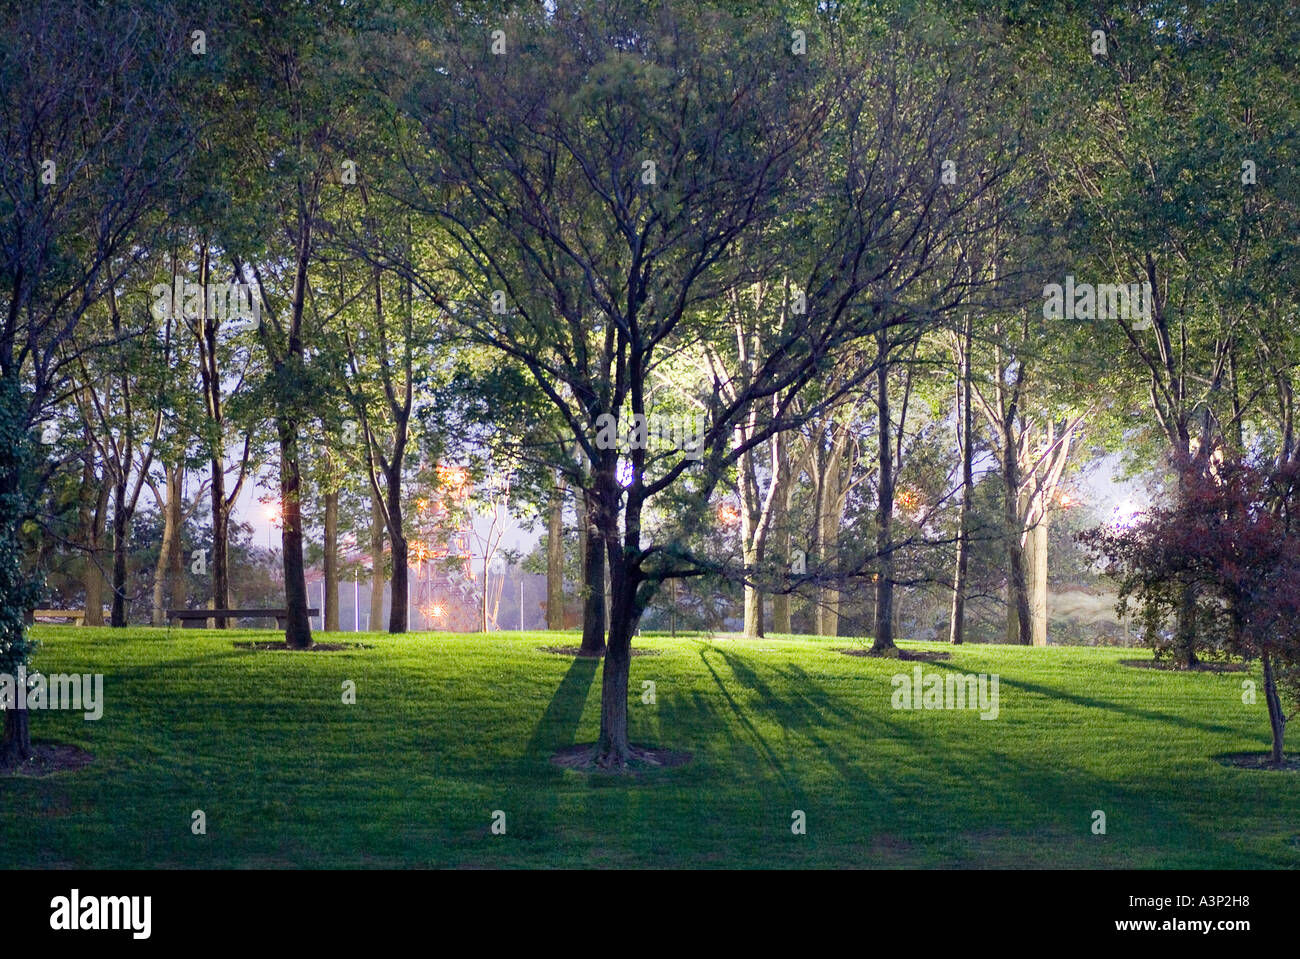 A Tree in The Park Backlit With Light At Night Stock Photo